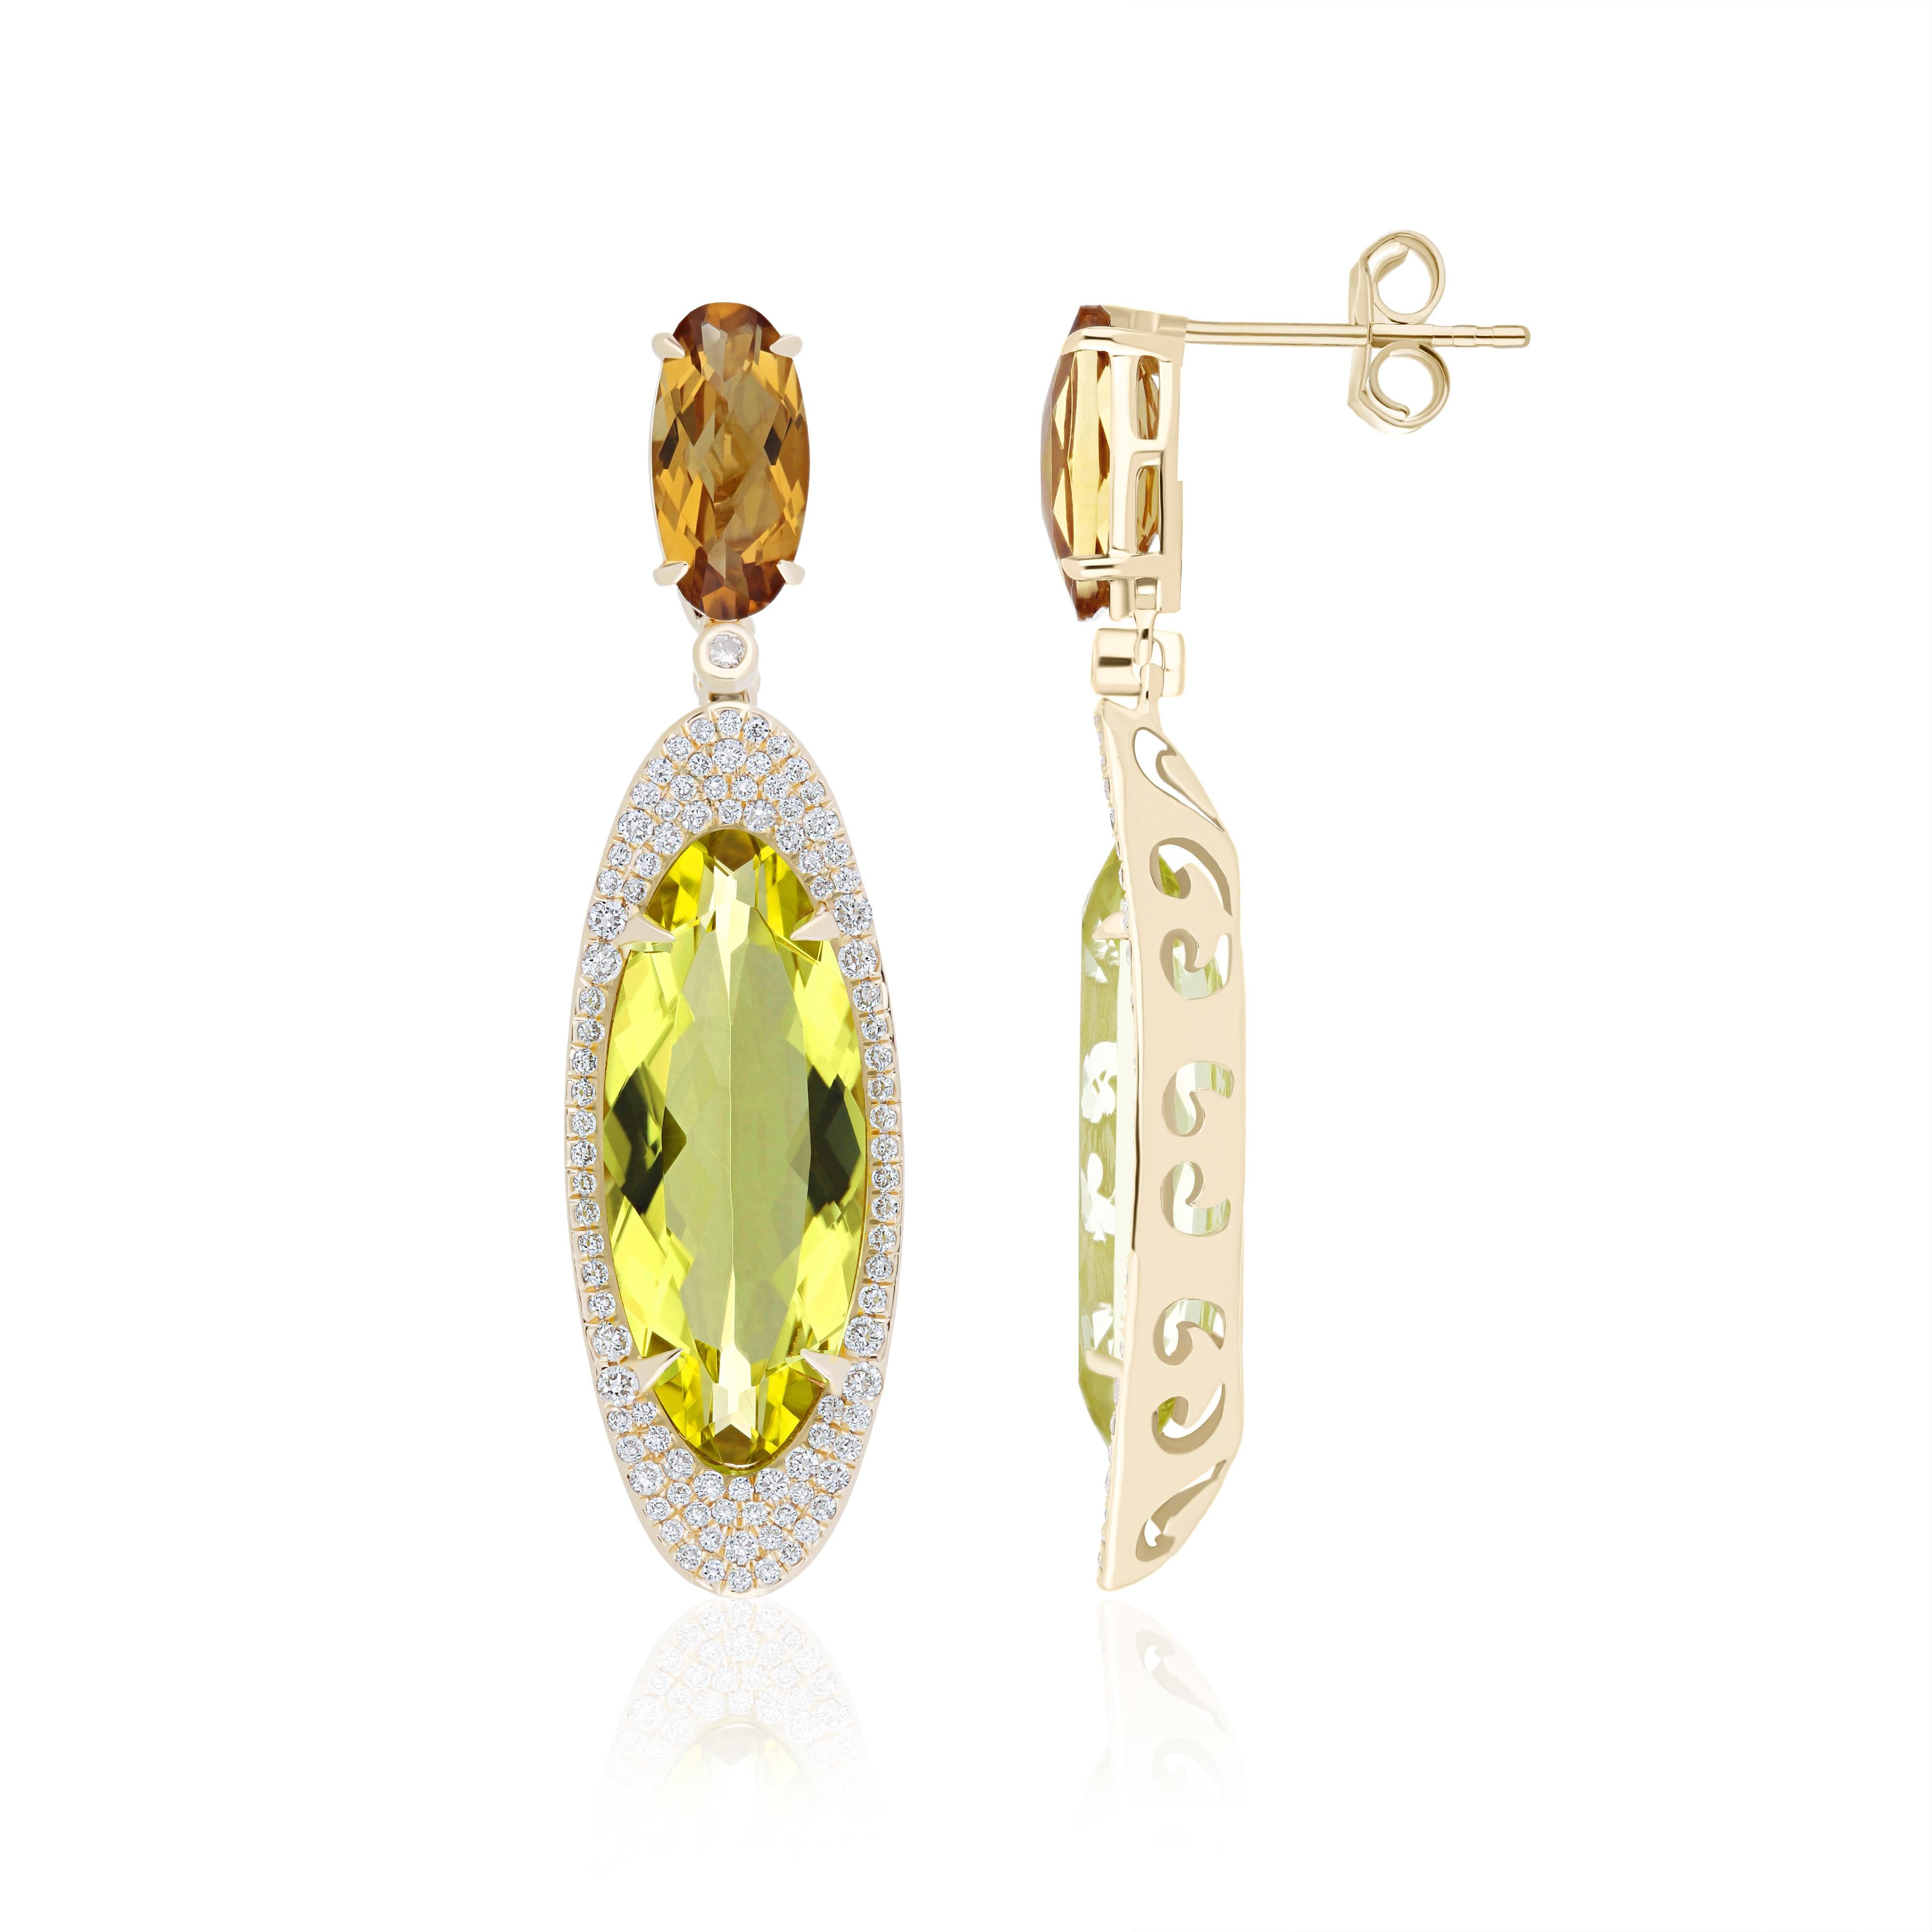 Elegant and Exquisitely Detailed 14Karat Yellow Gold Earring in Oval Shape Lemon Citrine weighing approx. 12.88Cts, & Citrine in Oval Shape with weighing approx. 2.54Cts and micro prove Set Diamond weighing approx. 0.68Cts Beautifully Hand-Crafted